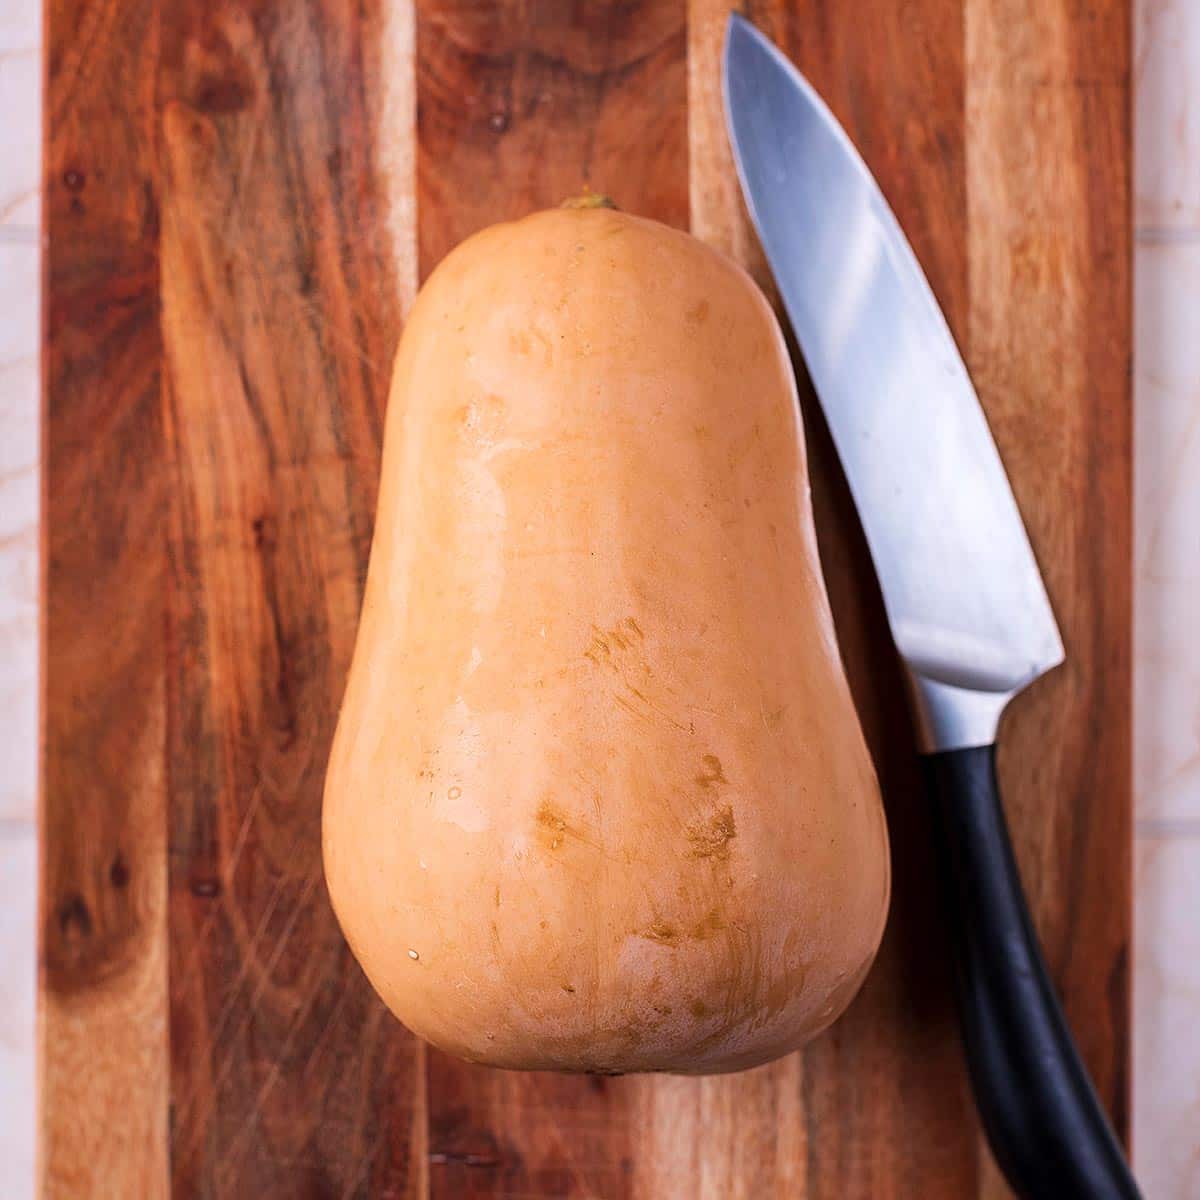 A whole butternut squash and a chef's knife on a wooden chopping board